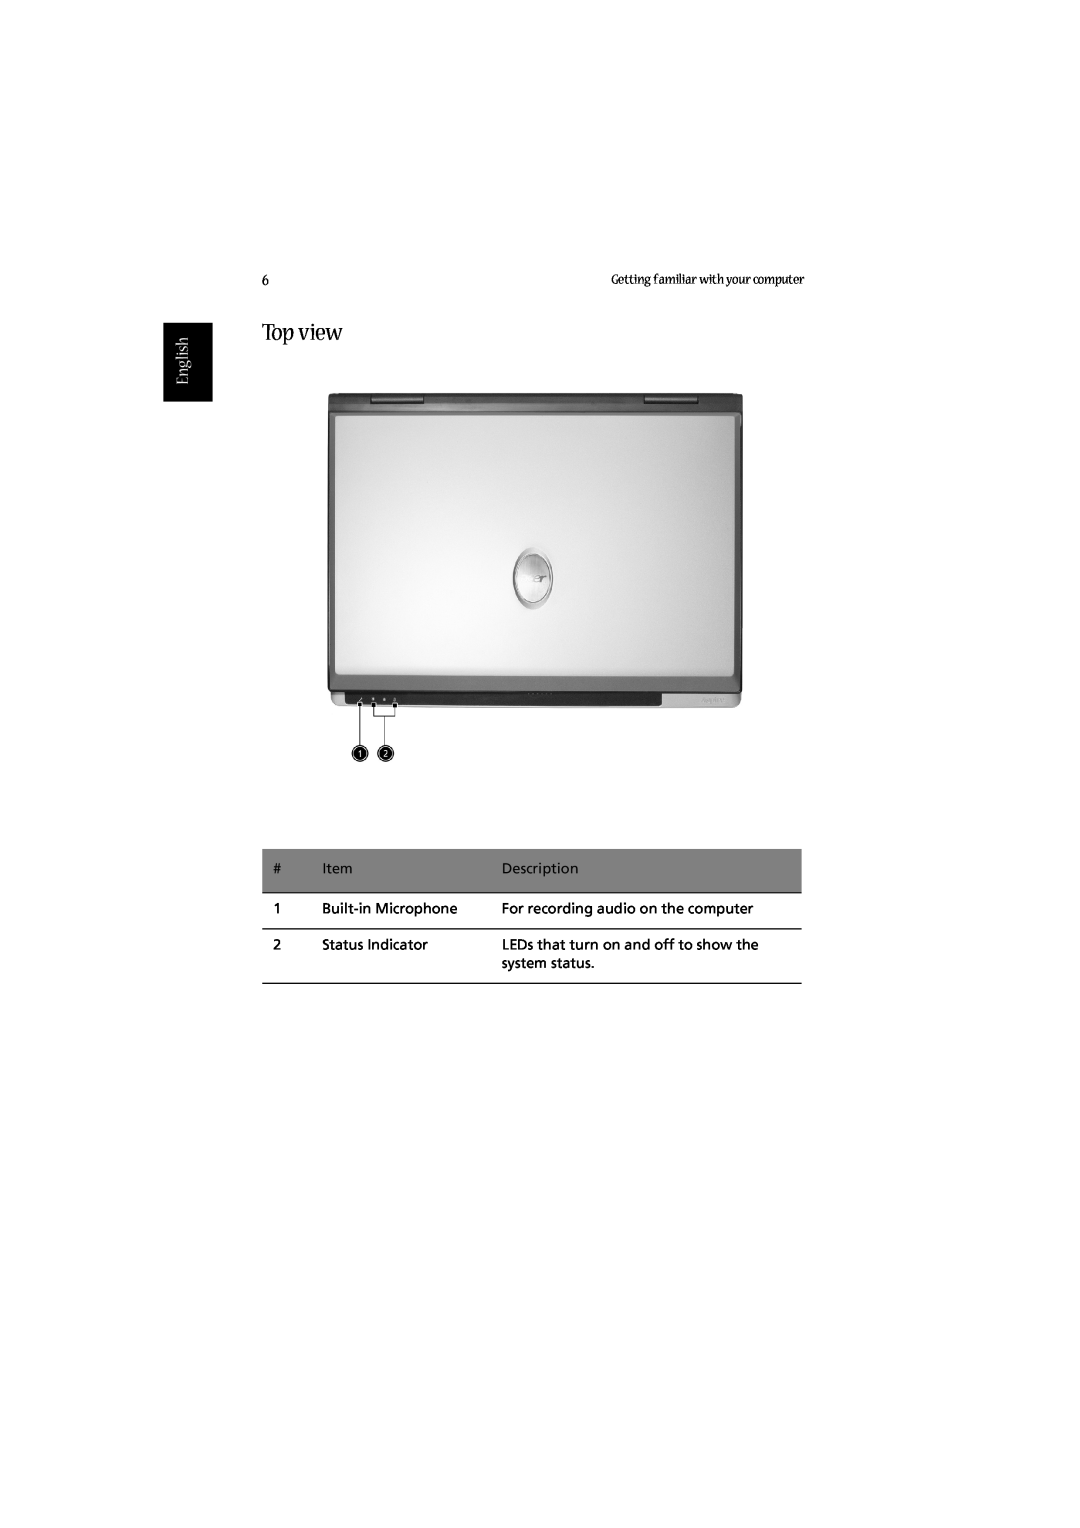 Acer 2010 manual Top view, English 